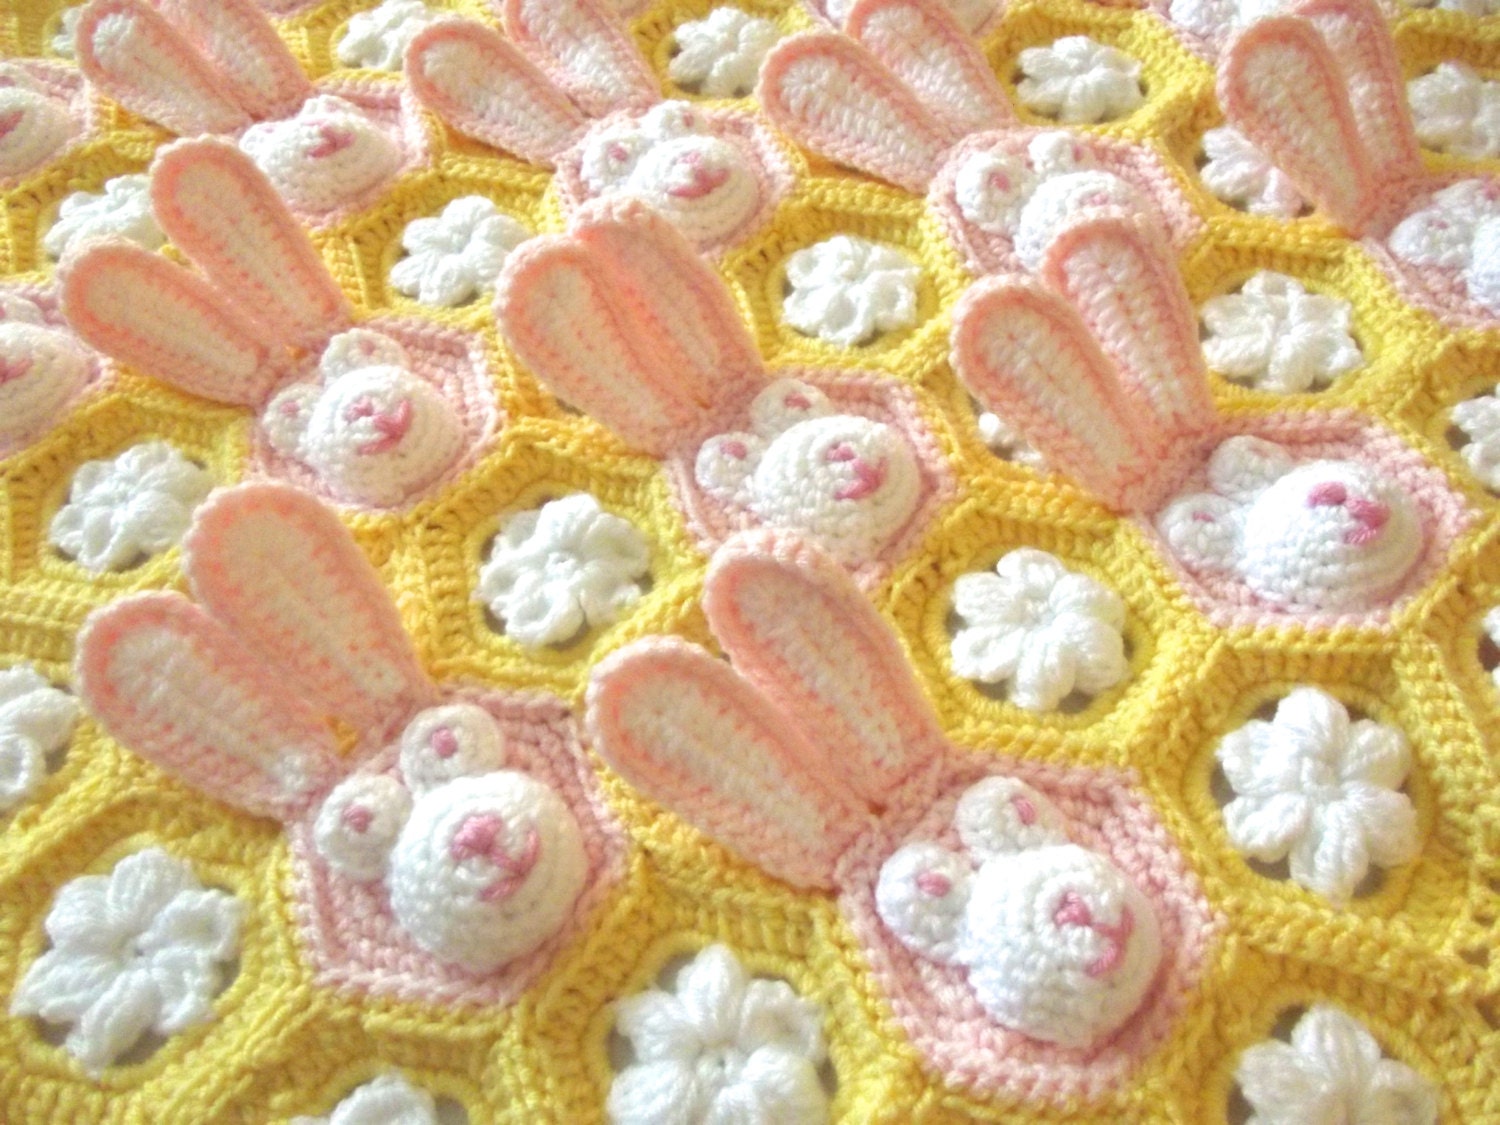 Popular items for bunny flowers on Etsy